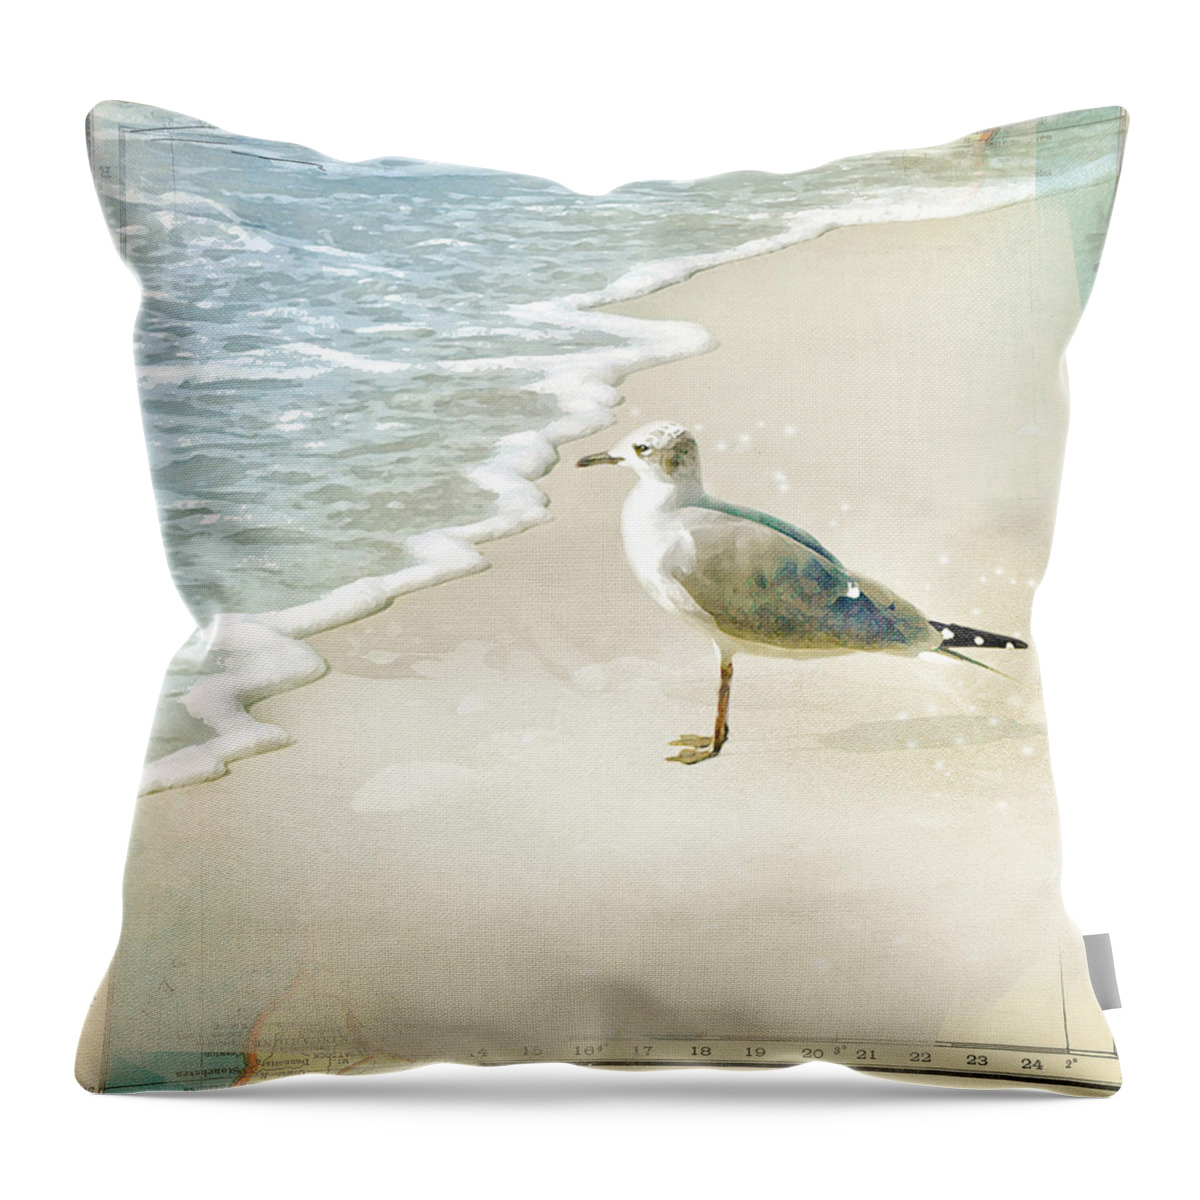 Seagull Throw Pillow featuring the photograph Marco Island Seagull by Karen Lynch